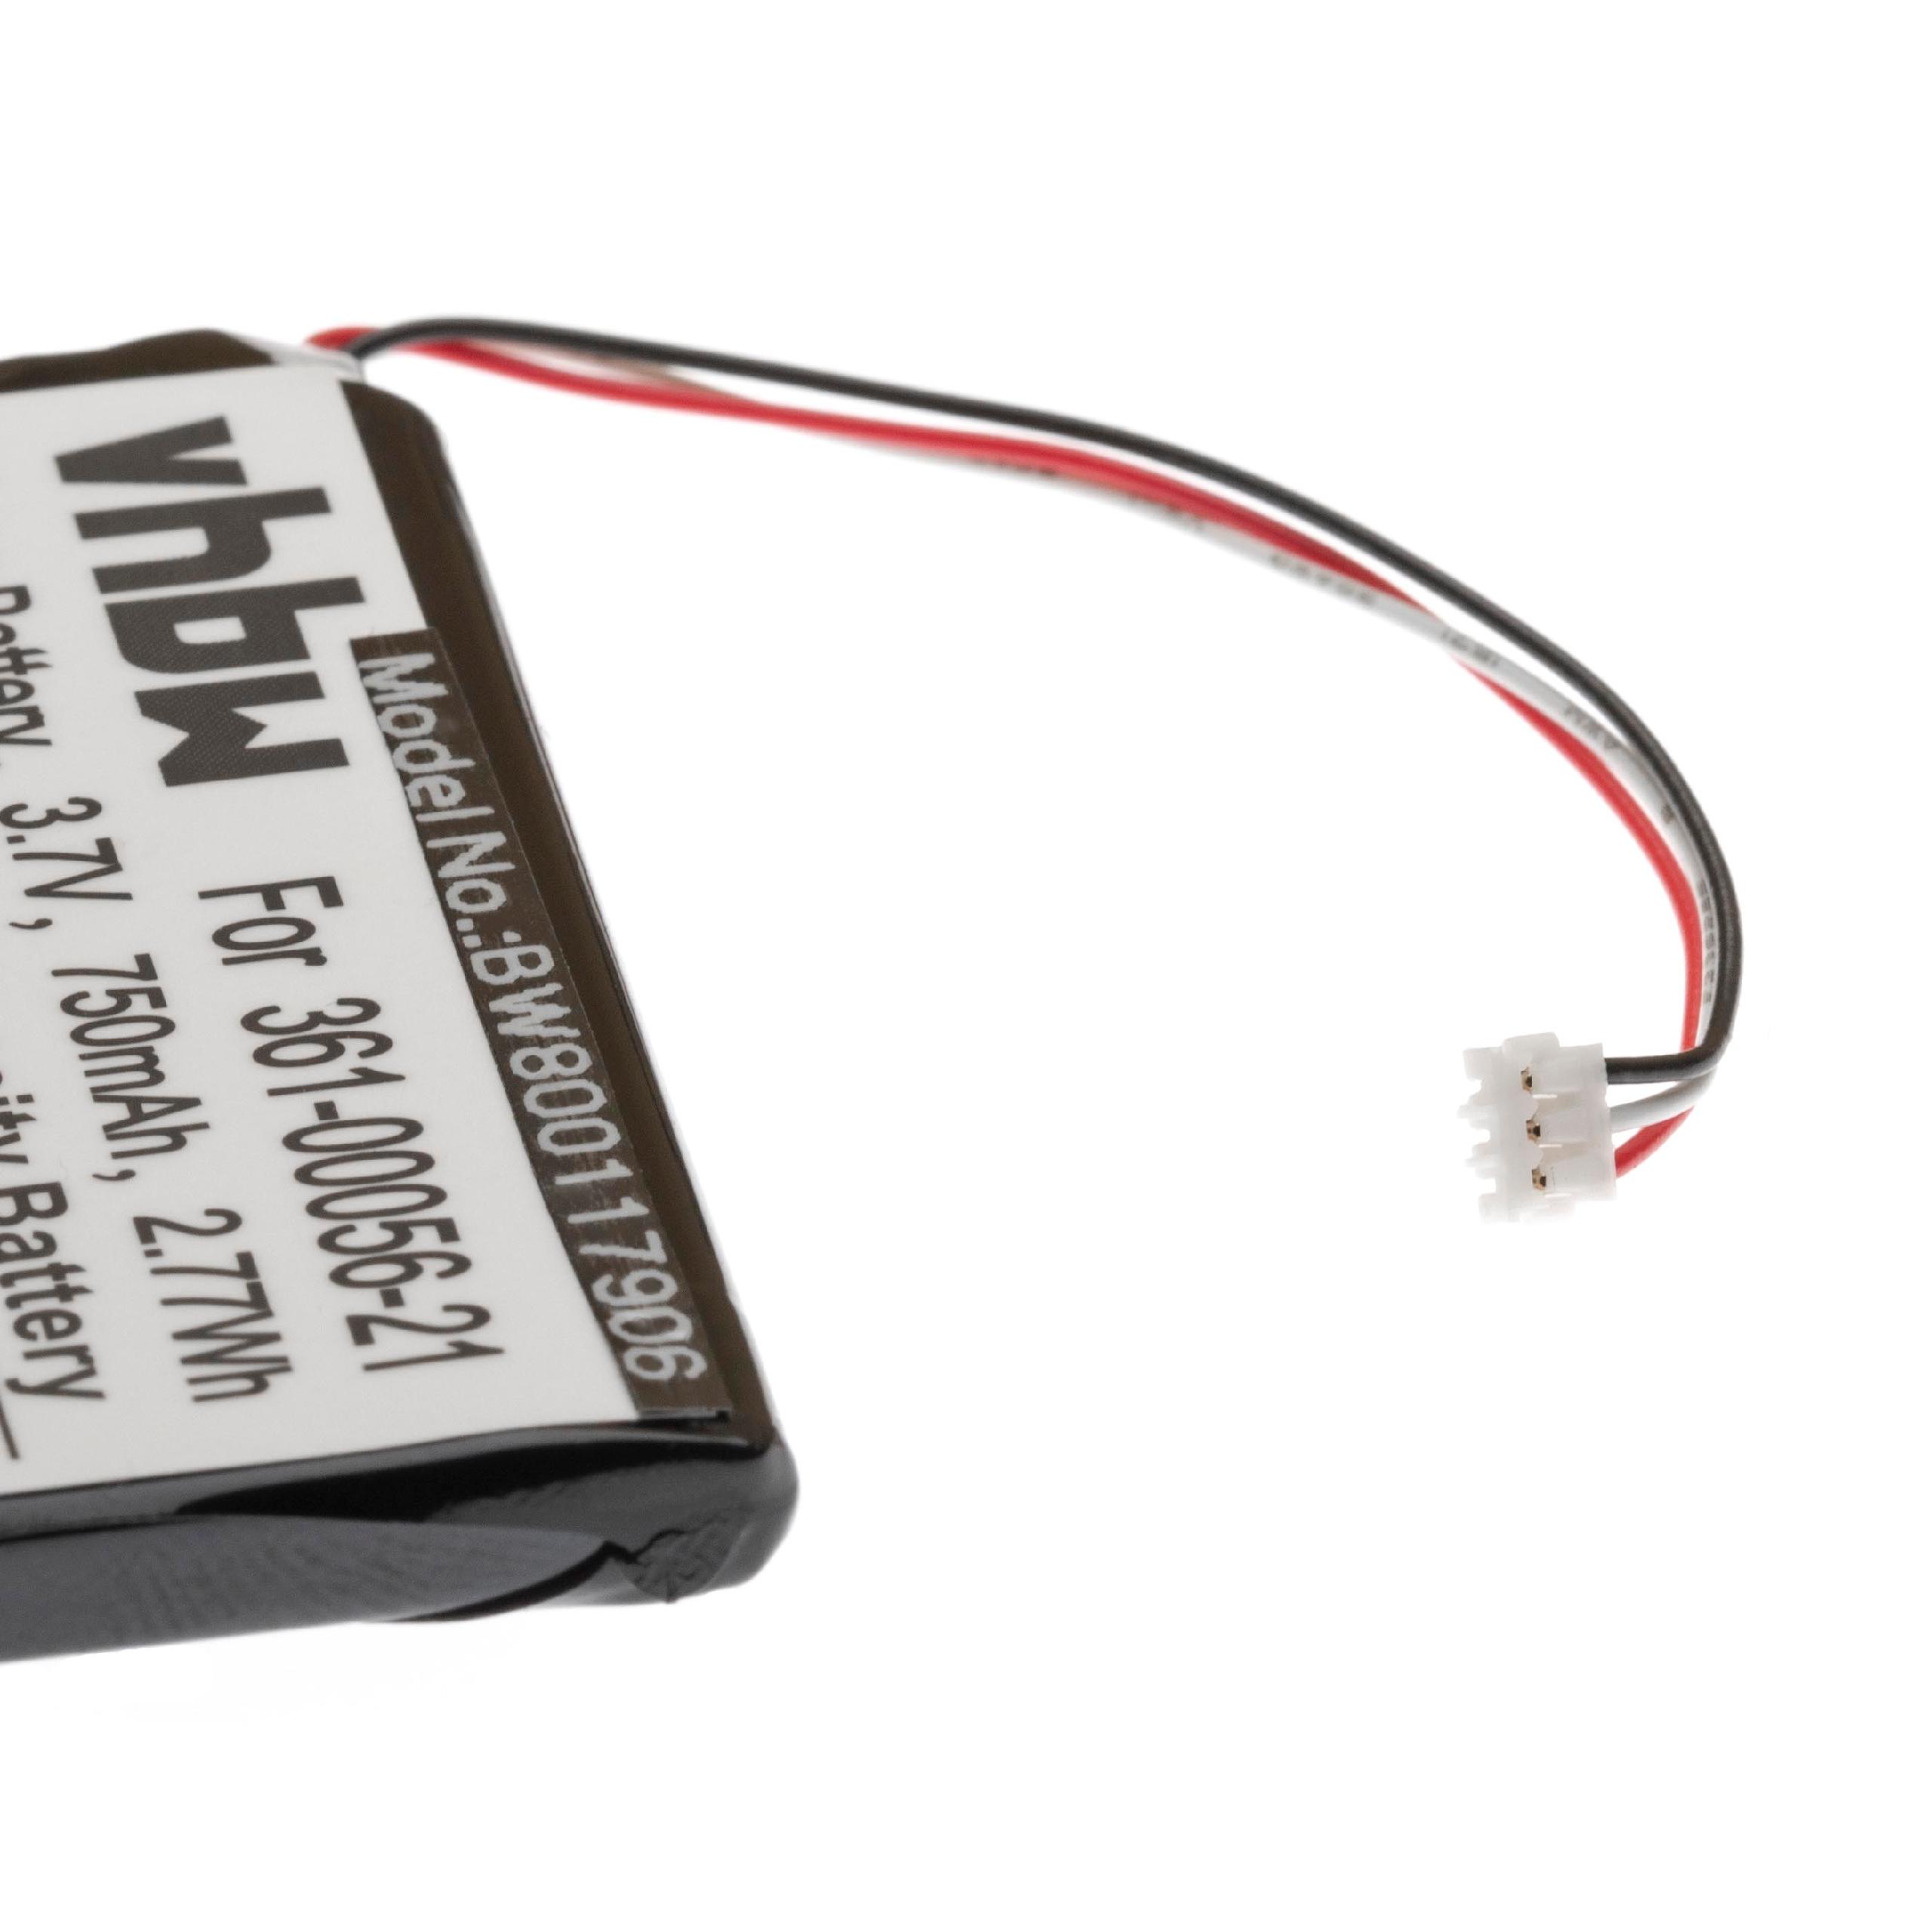 GPS Battery Replacement for Garmin 361-00056-21 - 750mAh, 3.7V